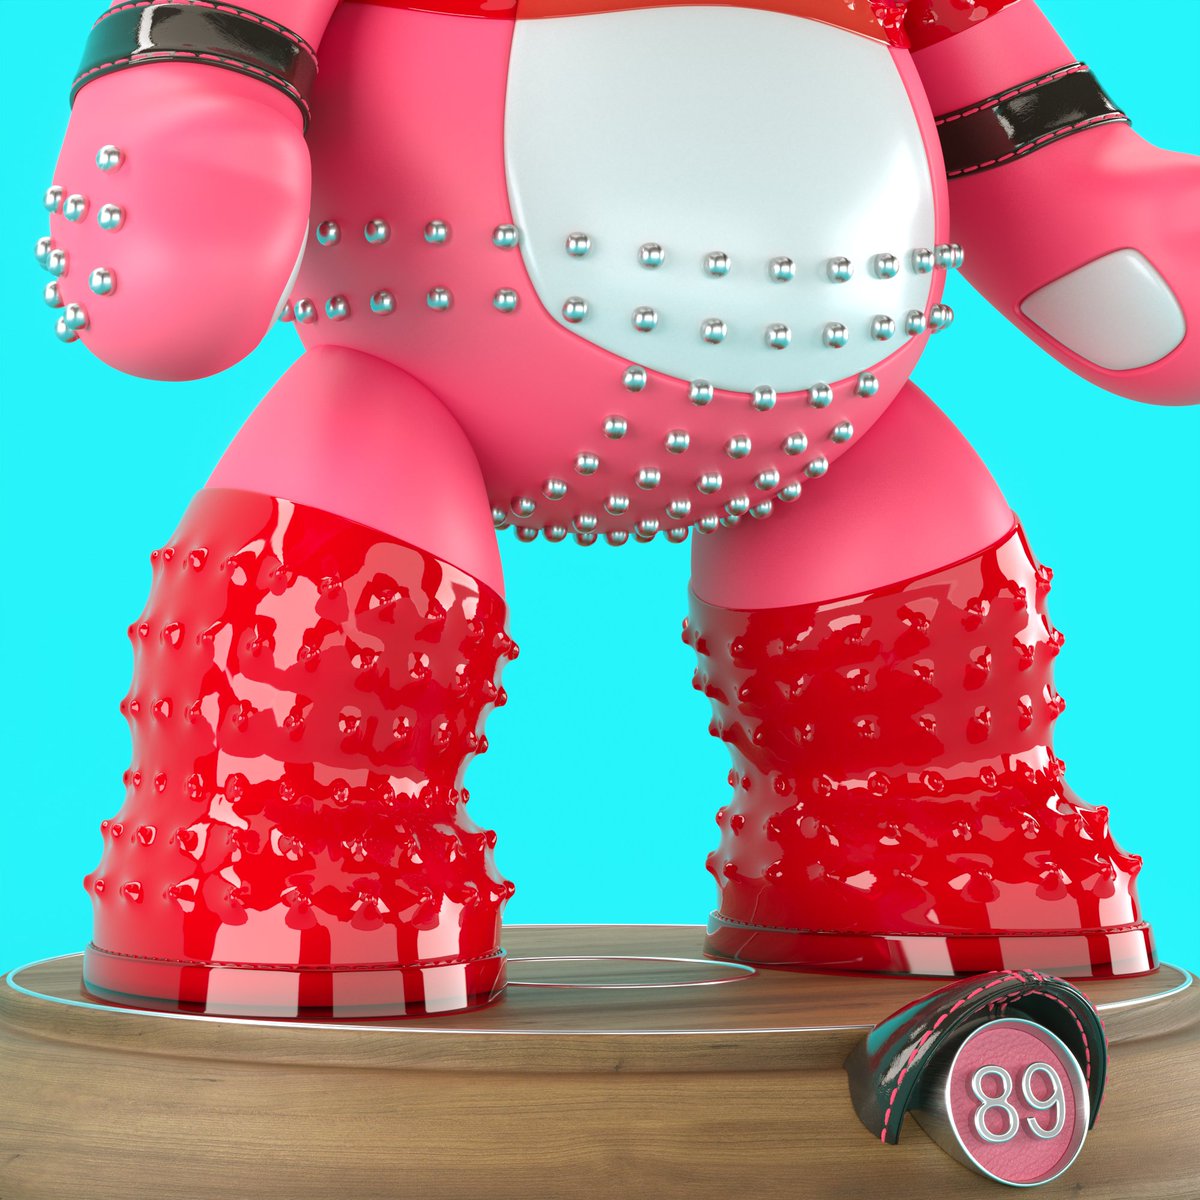 'Cute Pink' BDSM Punk № 89 by @inkognito_3D
 ⛓️🧸
The devil is in the details!😈🎨

Only 1 NFT! 
Only 10 art toys will be created based on this NFT! 
👇
opensea.io/collection/why…
instagram.com/why_not_99_nft/

#Teddy #NFTCollection #digitalart #NFTartist 
 #opensea #NFTs #plastictoy